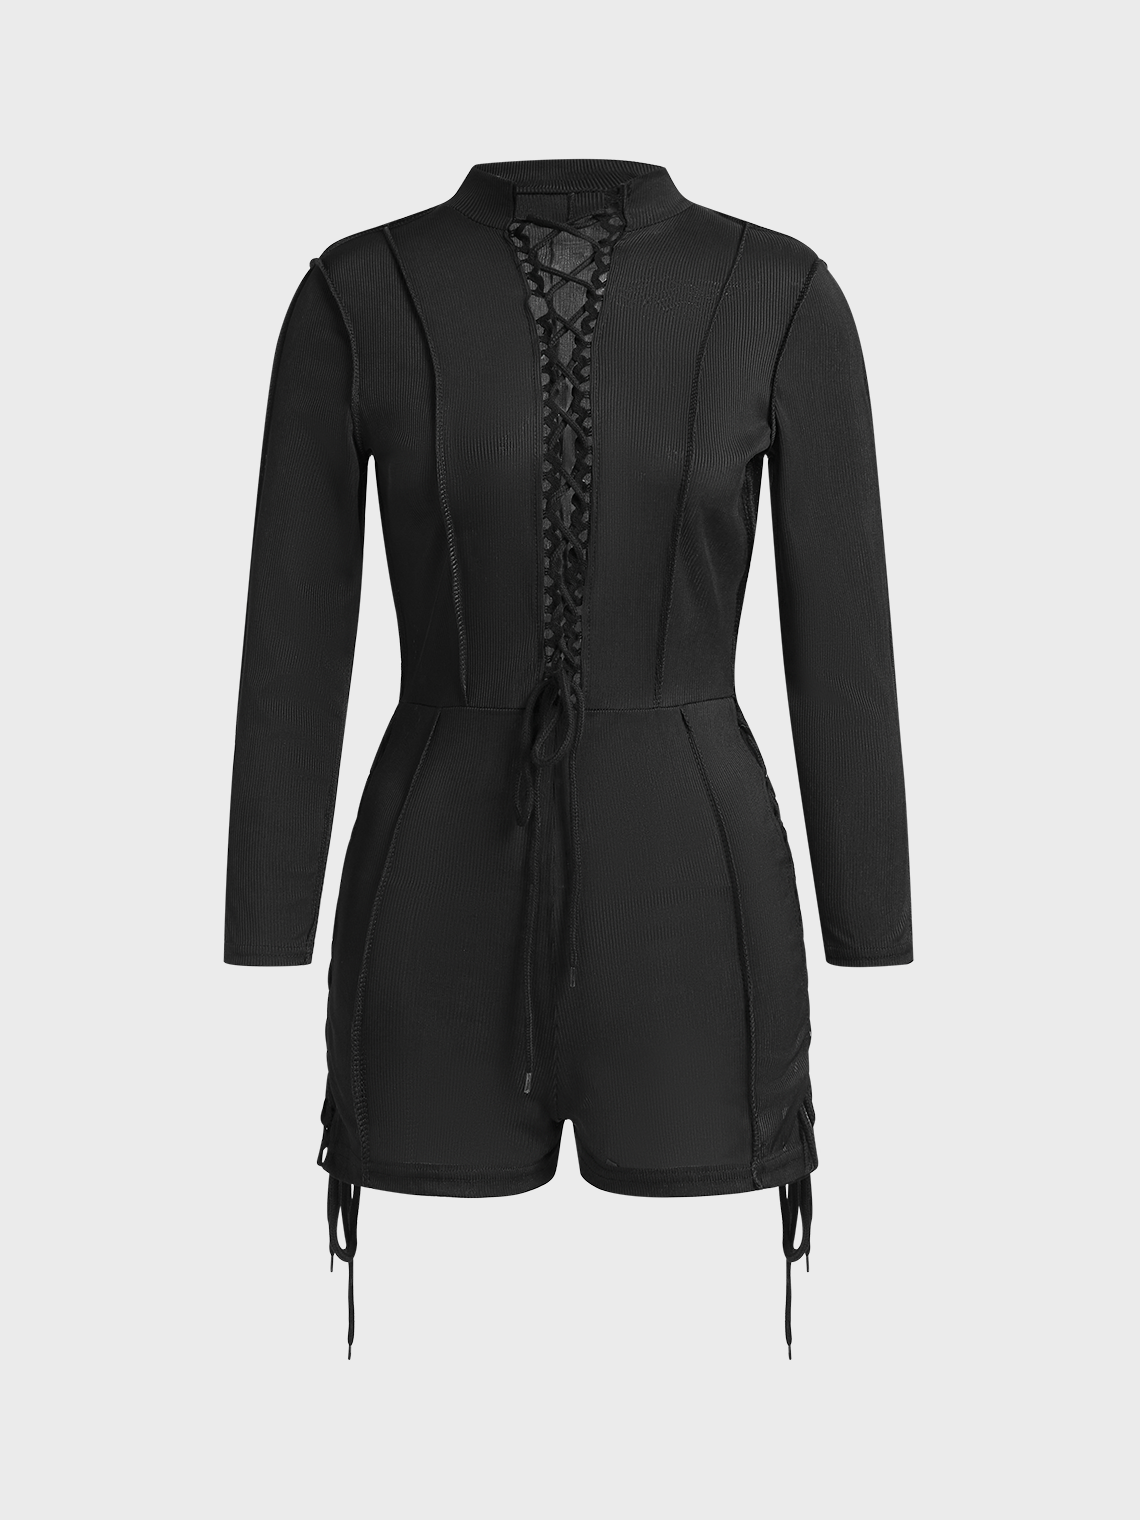 Lace Up Stand Collar Plain Long Sleeve Romper